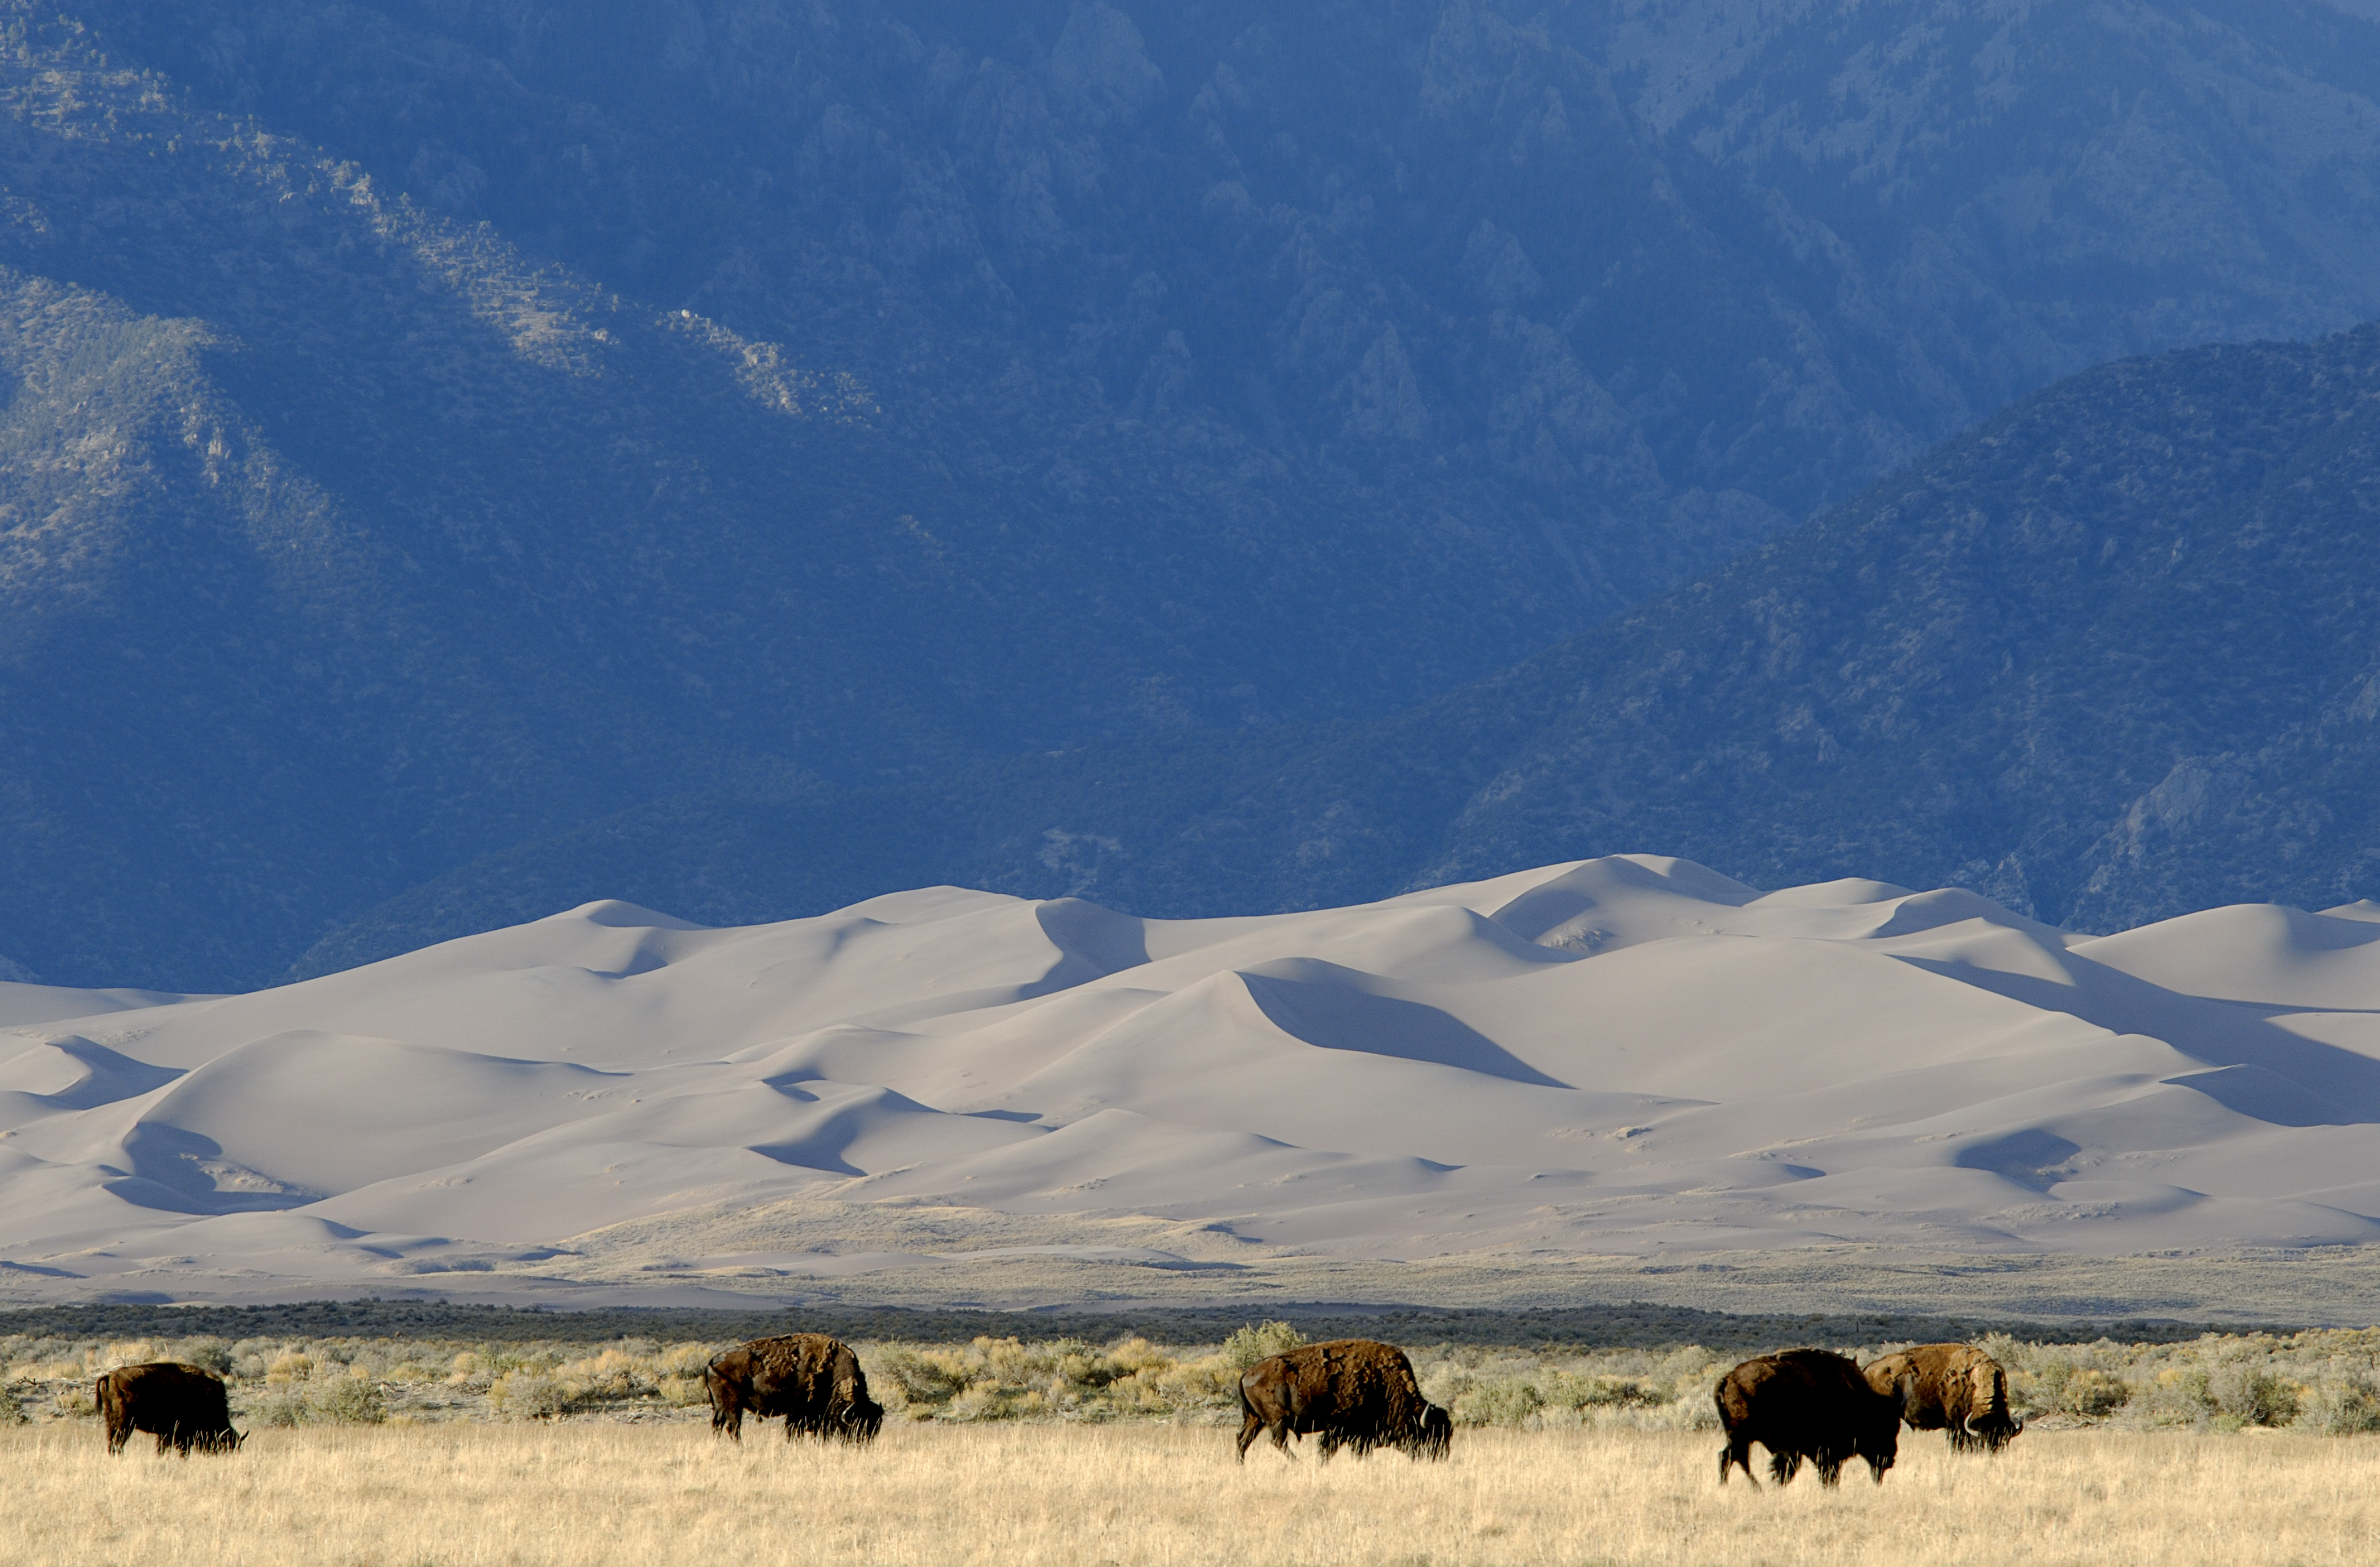 A group of buffalo walking on grass with sand dunes and mountains in the background.